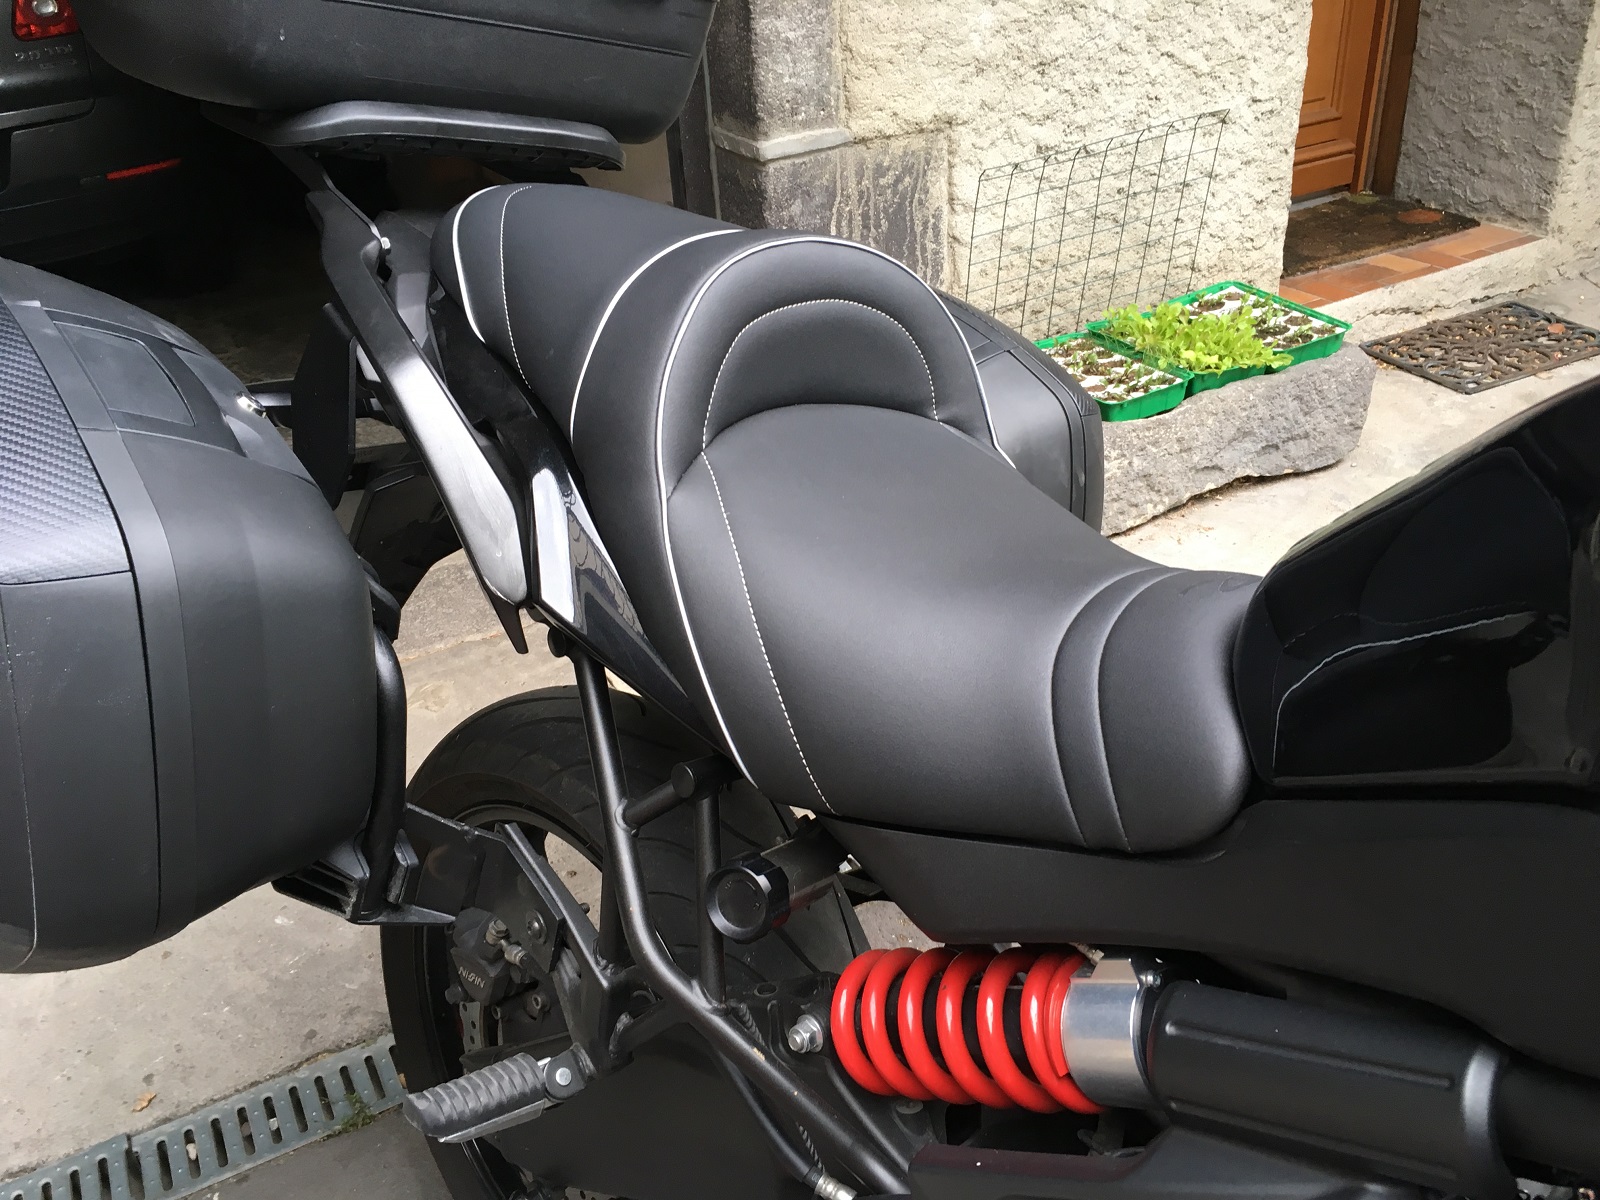 reductor Recite Ryg, ryg, ryg del KAWASAKI VERSYS 650 [2007-2016] - Deluxe seats, petrol tank covers, tank  bags [Rates for: FRANCE]